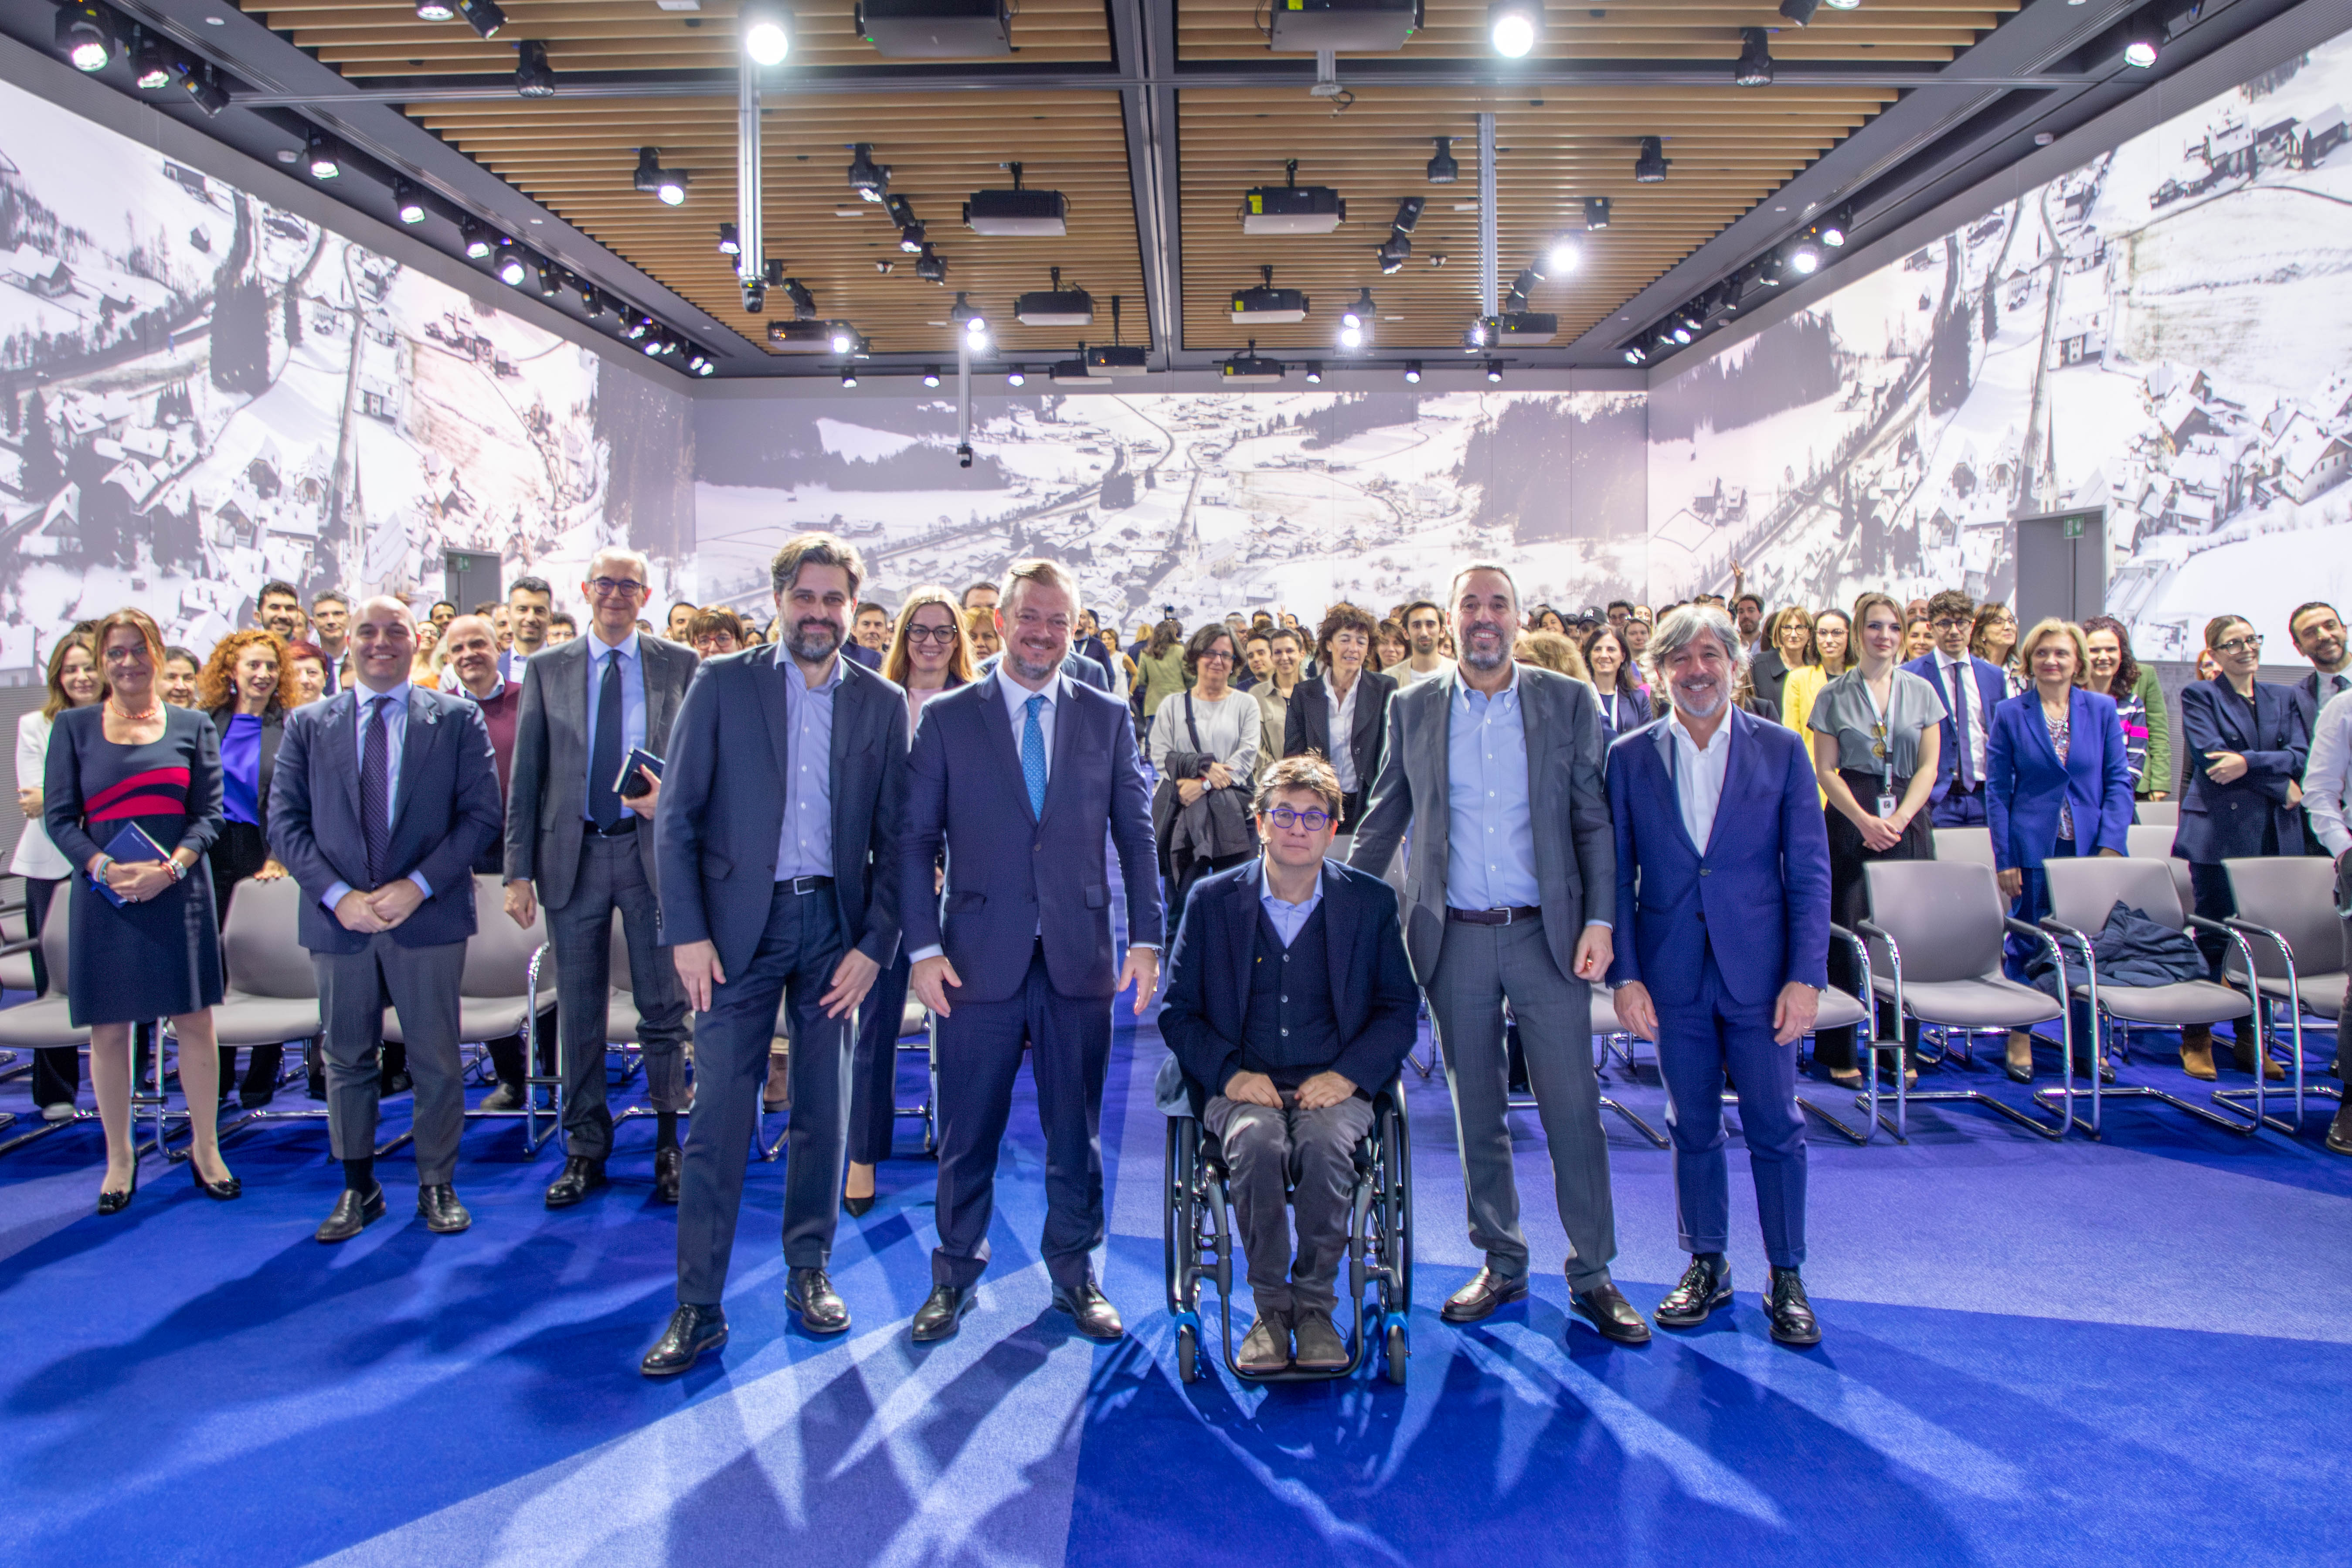 The President of the International Paralympic Committee visiting the employees of the Milan Cortina 2026 Foundation and Allianz